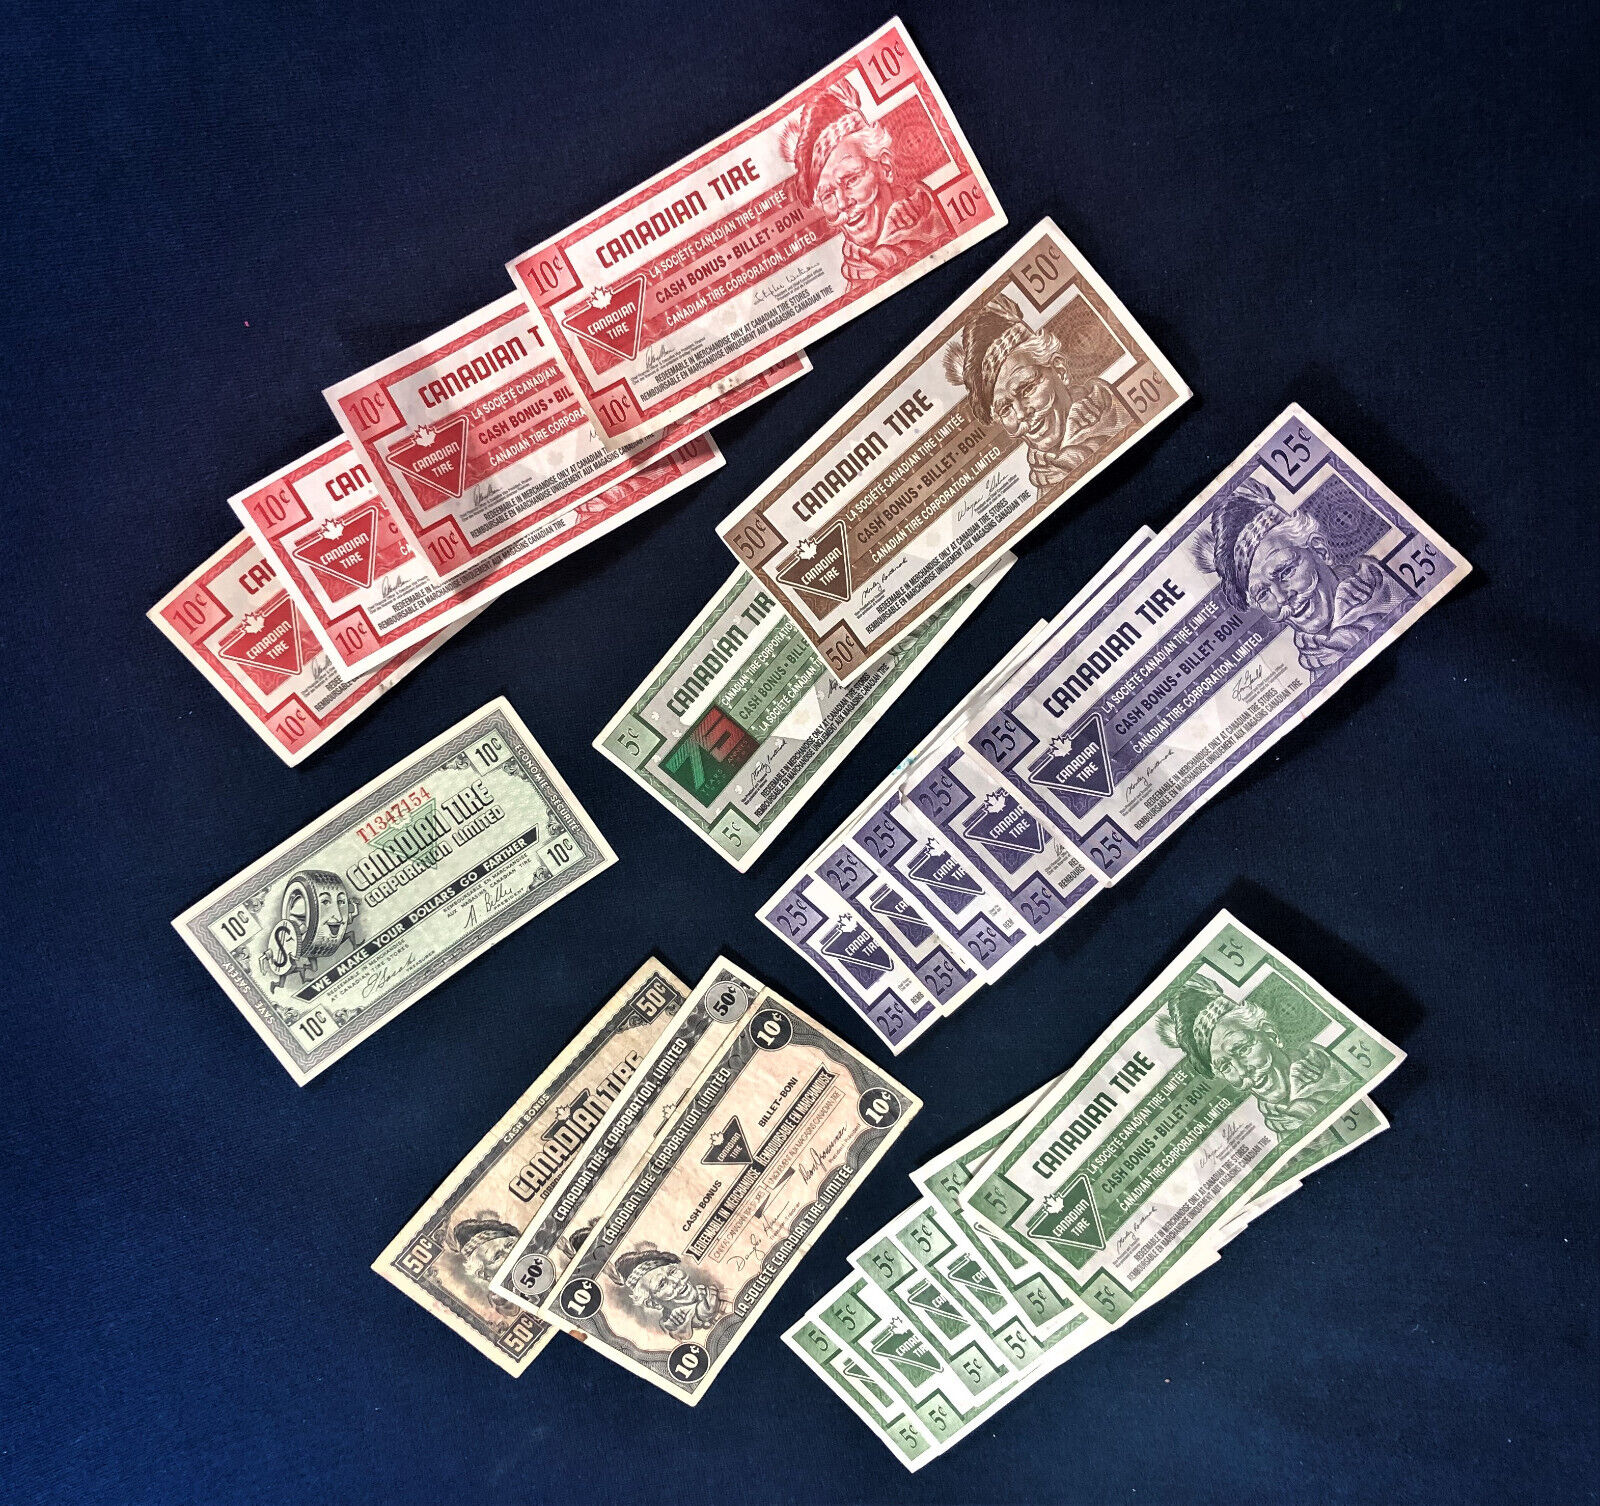 Free✈shipping 21 Pieces Of Canadian Tire Money 7 X 5¢ 6 X 1 0¢ 5 X 25¢ 3 X 50¢